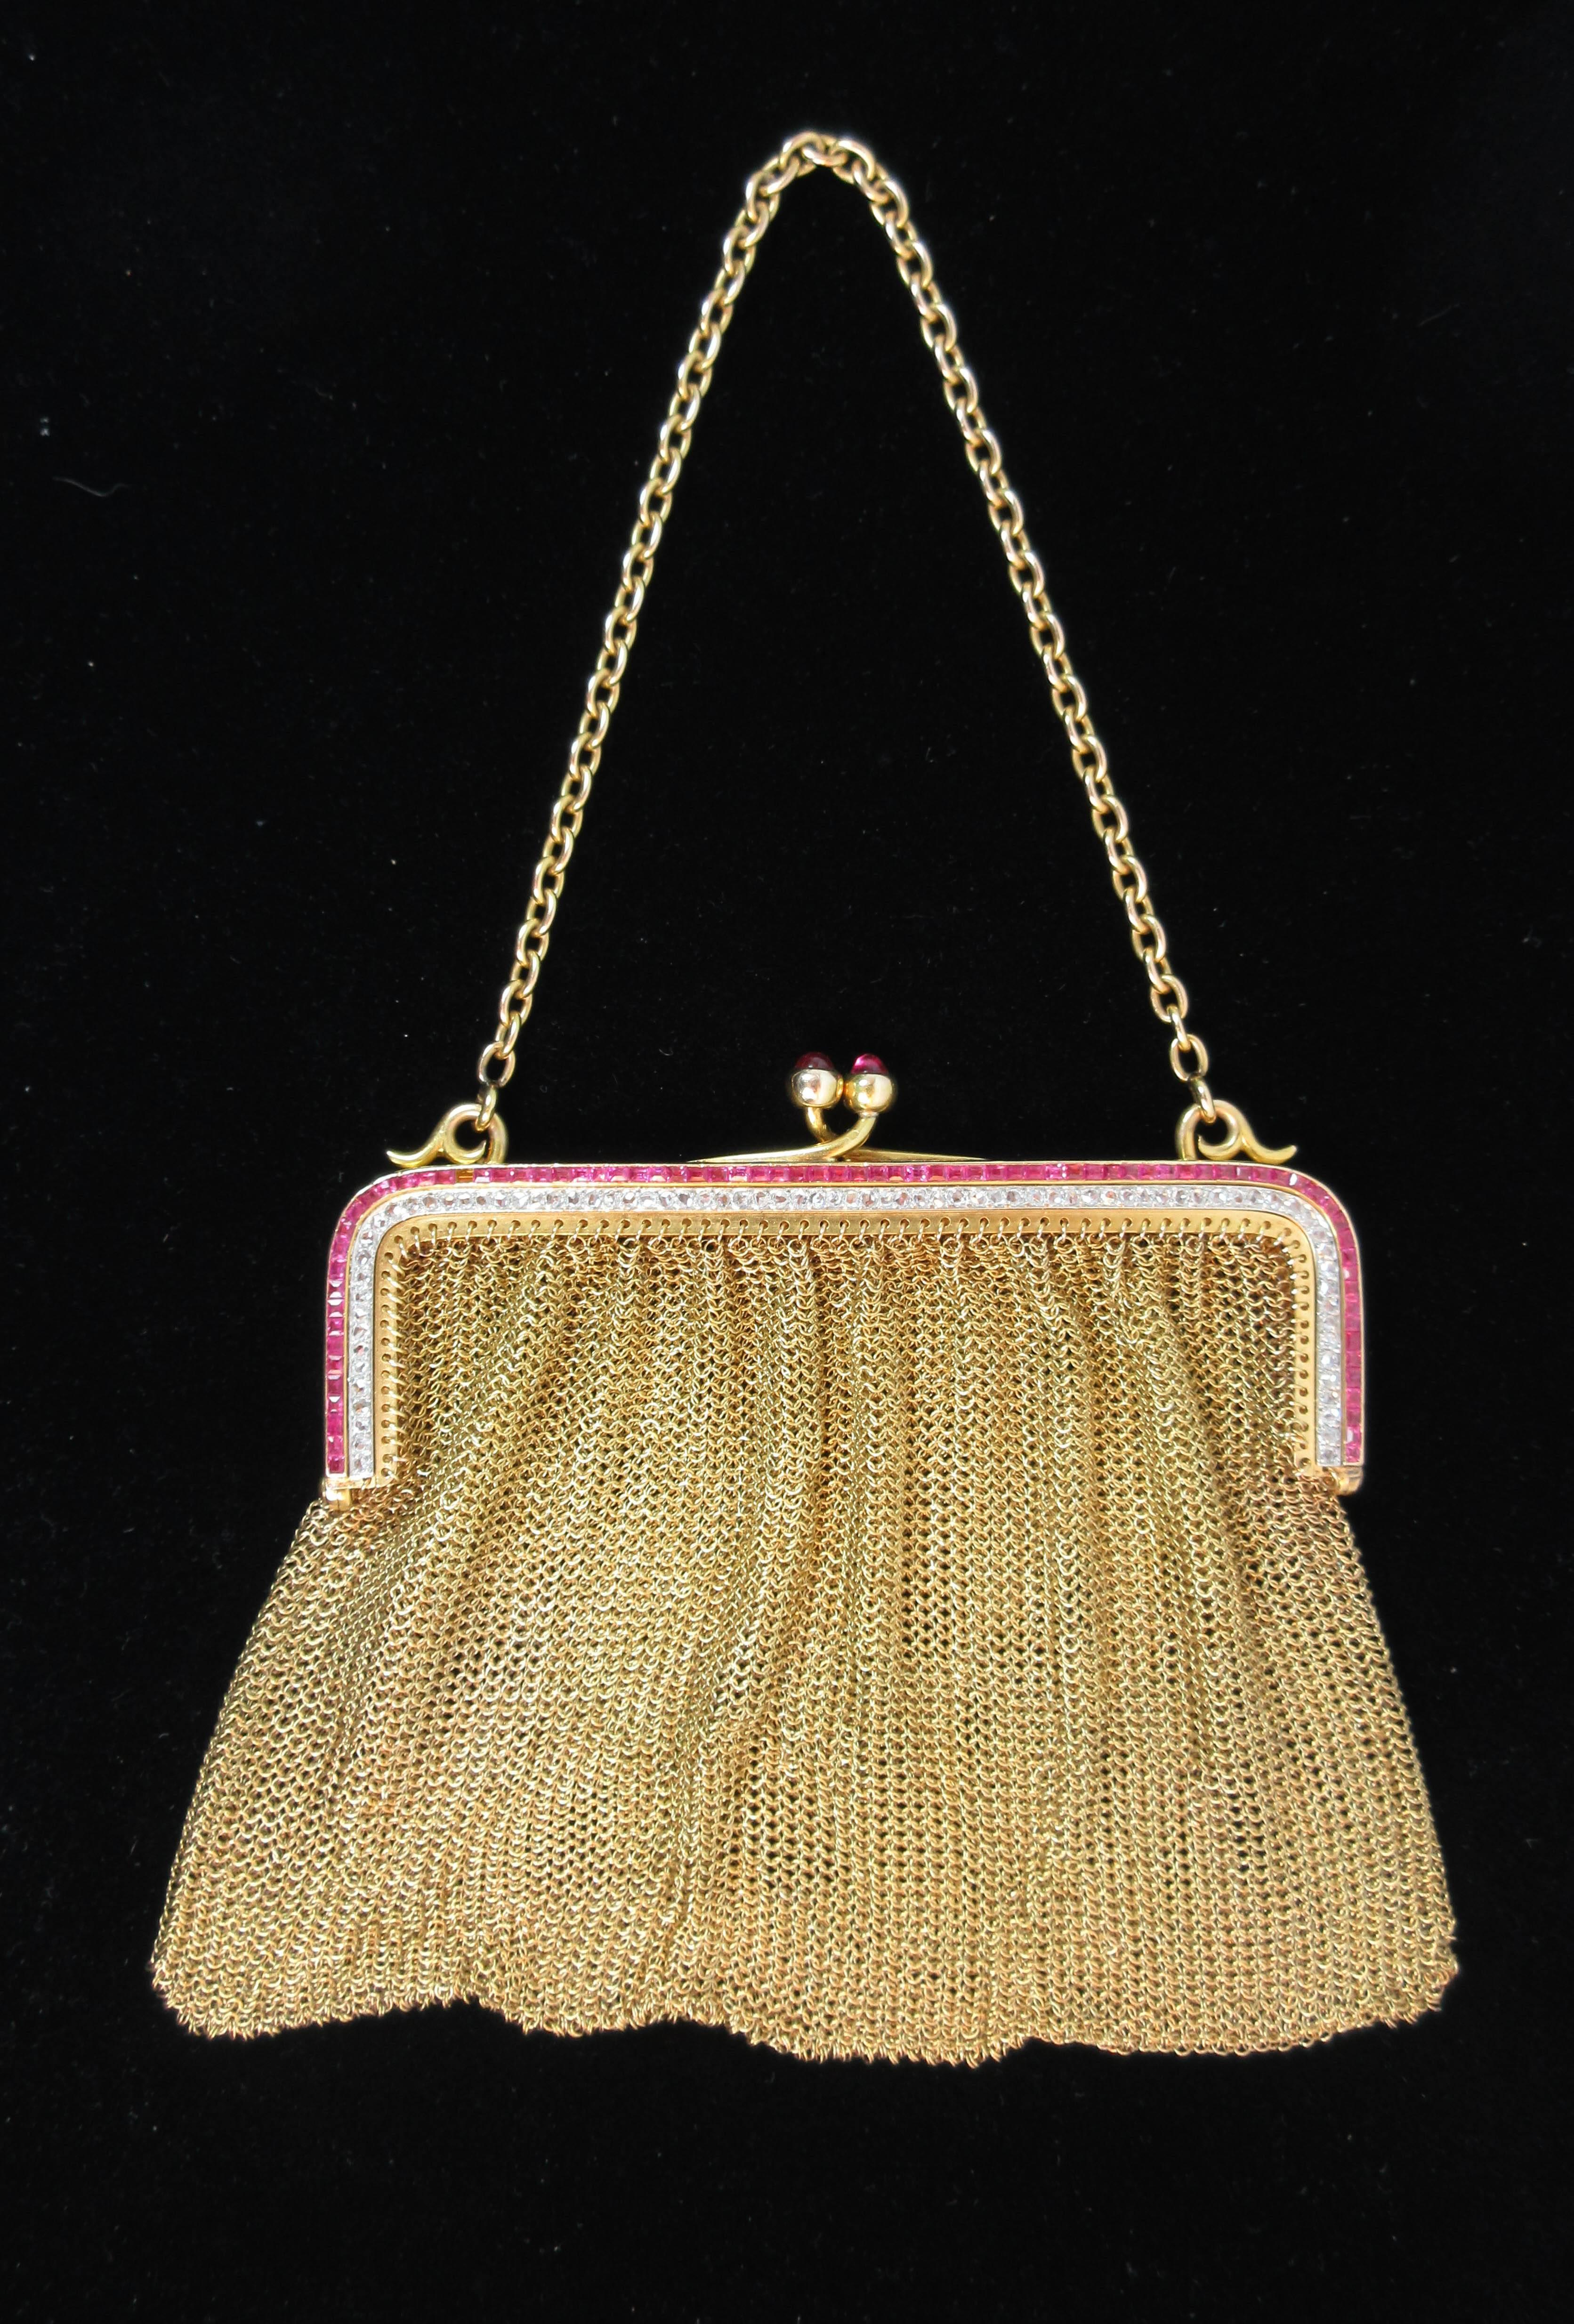 This vintage evening purse is composed of 18kt yellow gold and features a stunning array of pave Rubies & Diamonds.  Mesh design with frame can have an additional silk lining added. In excellent condition.

Please feel free to ask any questions